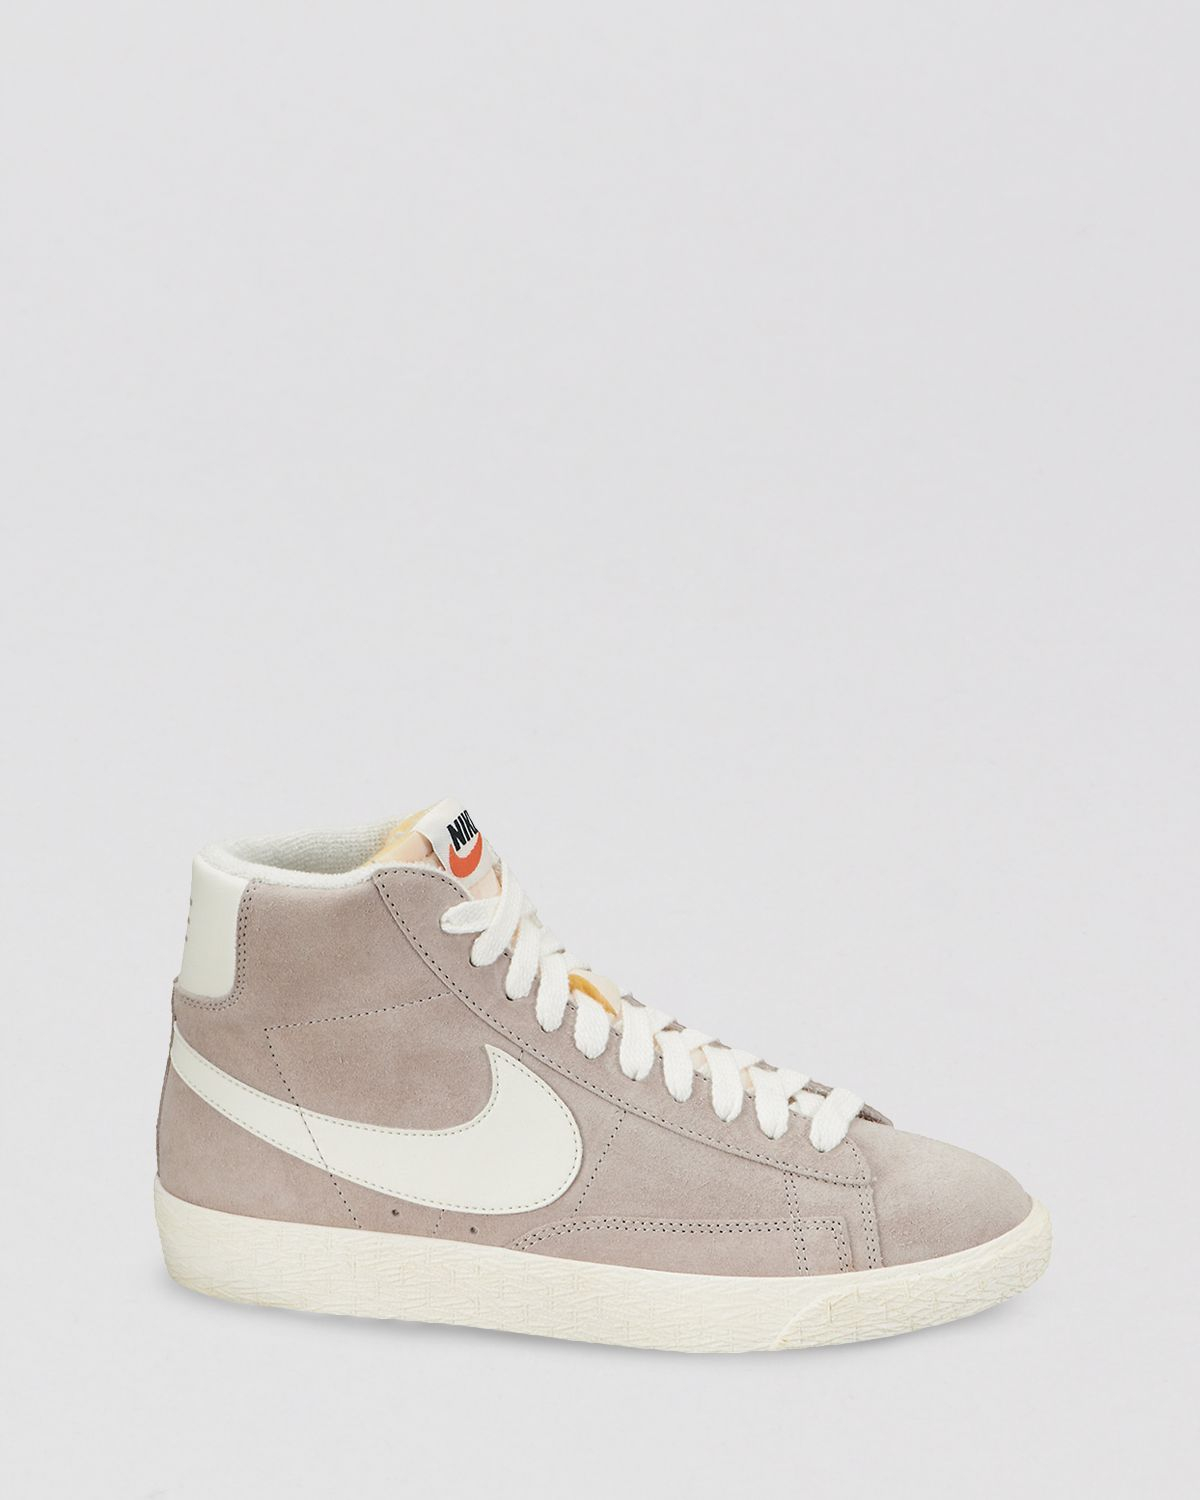 mid high top sneakers womens